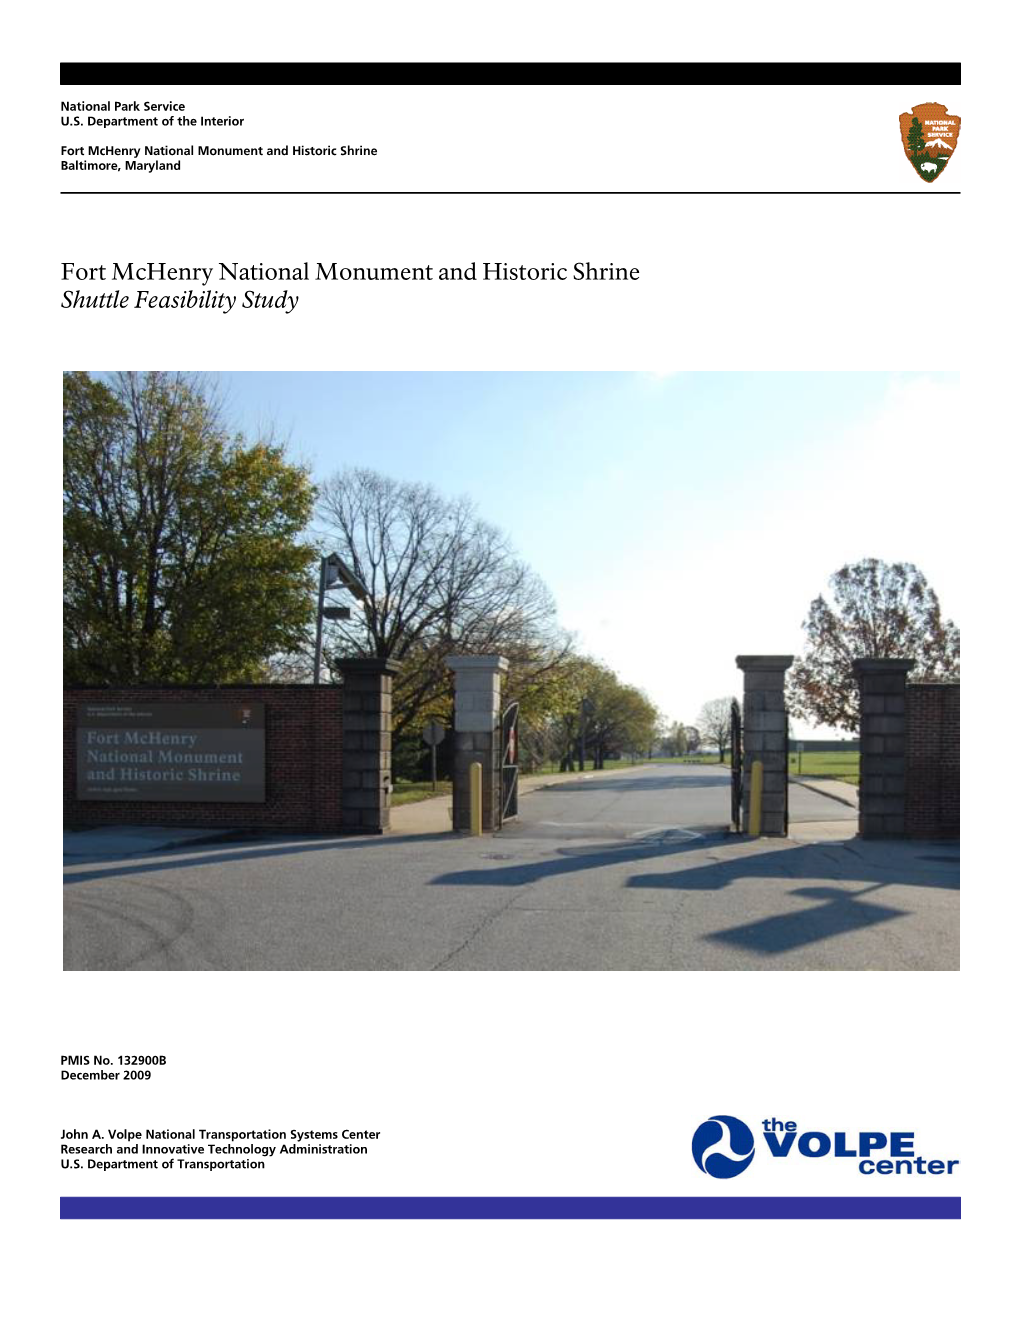 Fort Mchenry National Monument and Historic Shrine Shuttle Feasibility Study